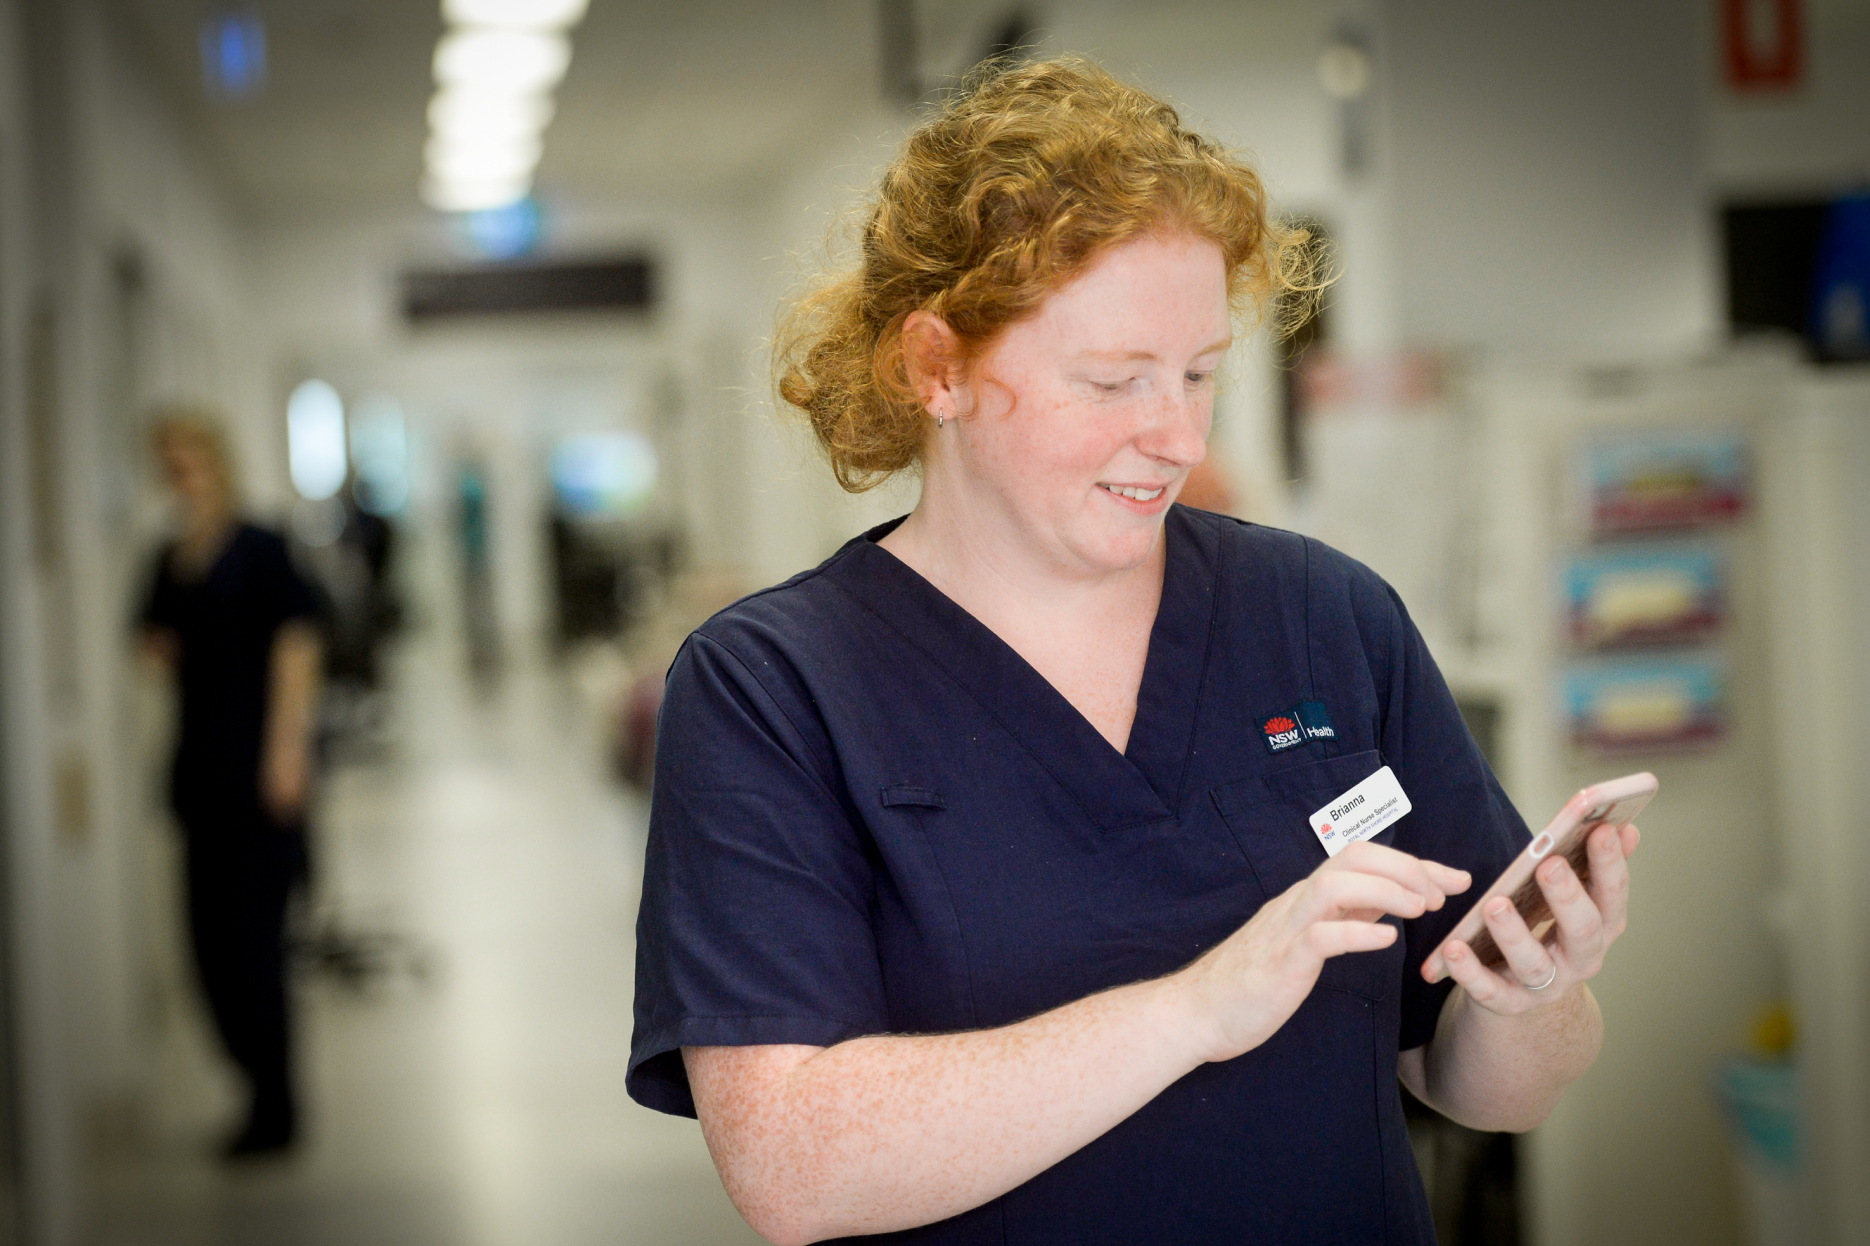 Female nurse checking her mobile phone in a hospital hallway.